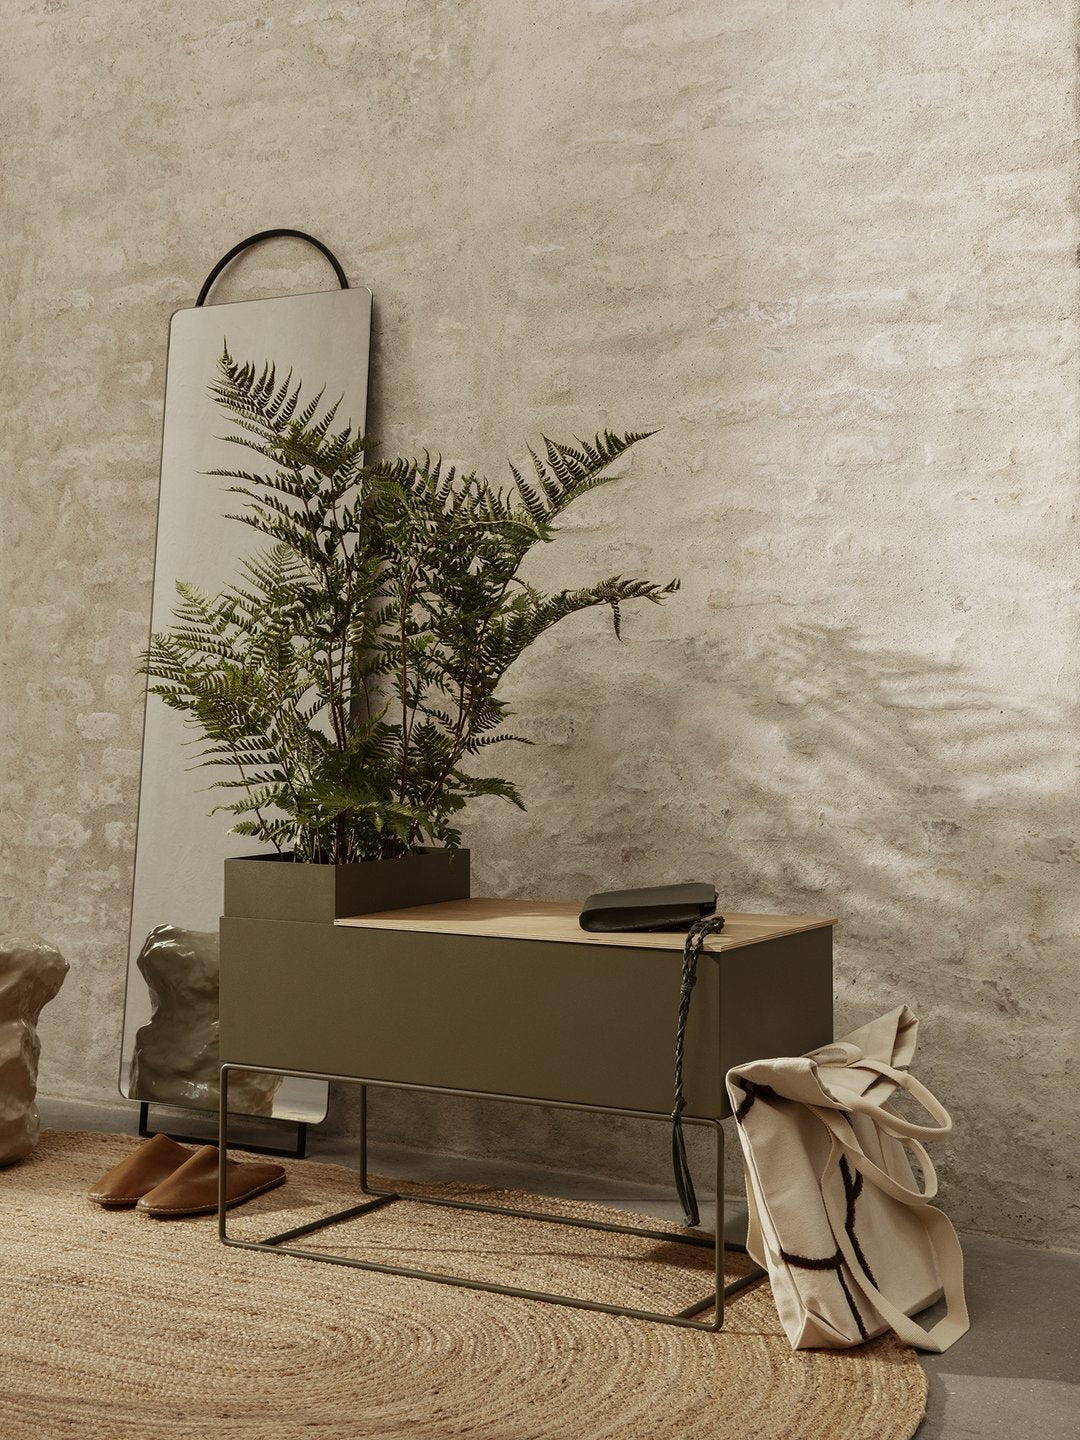 Plant Box - Large by ferm LIVING